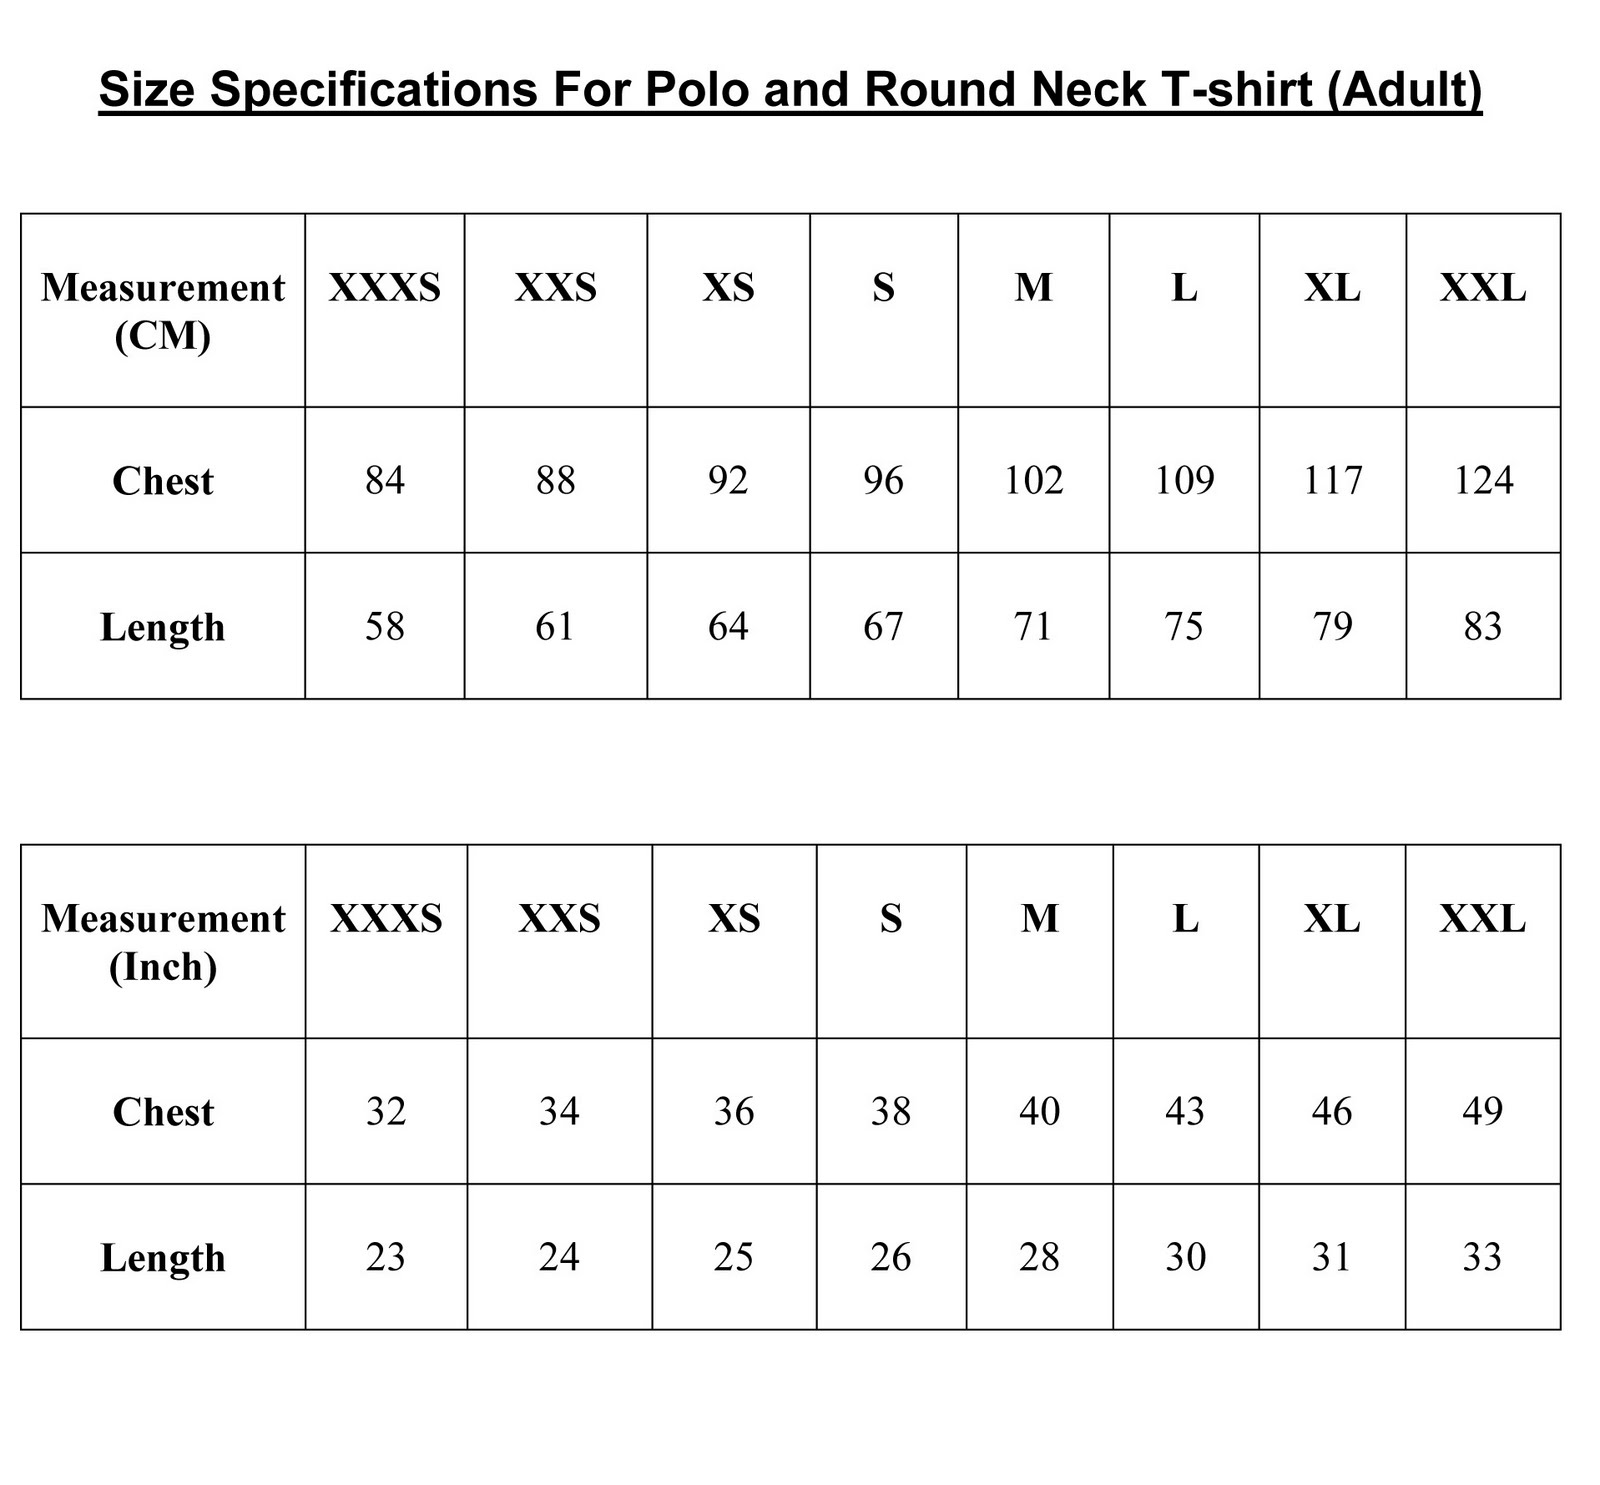 Silver Size Chart For Jeans